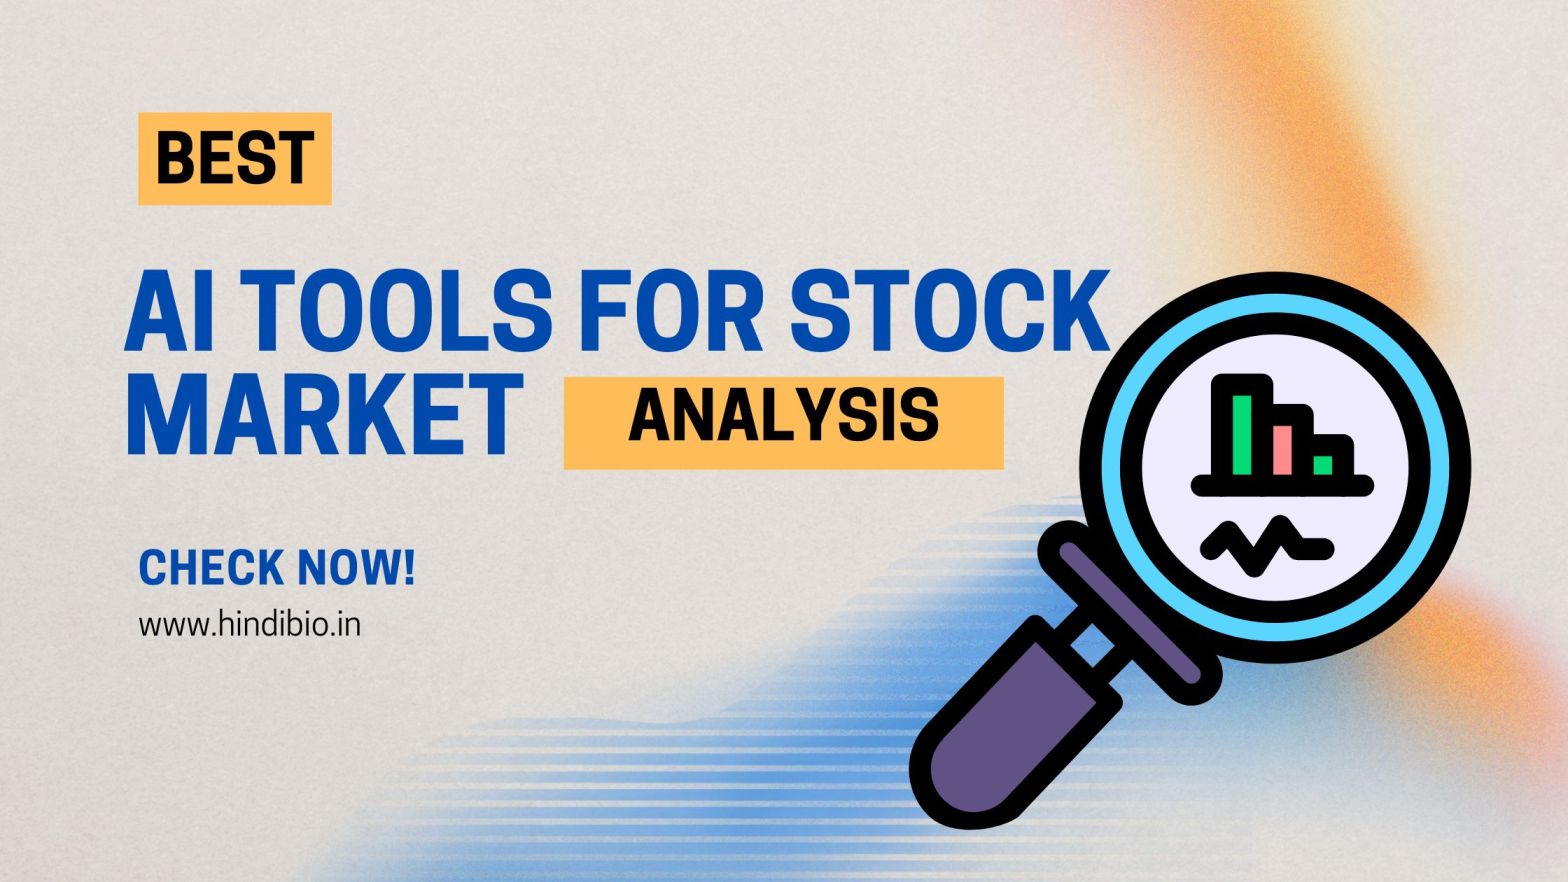 Best AI Tools for Stock Market Analysis